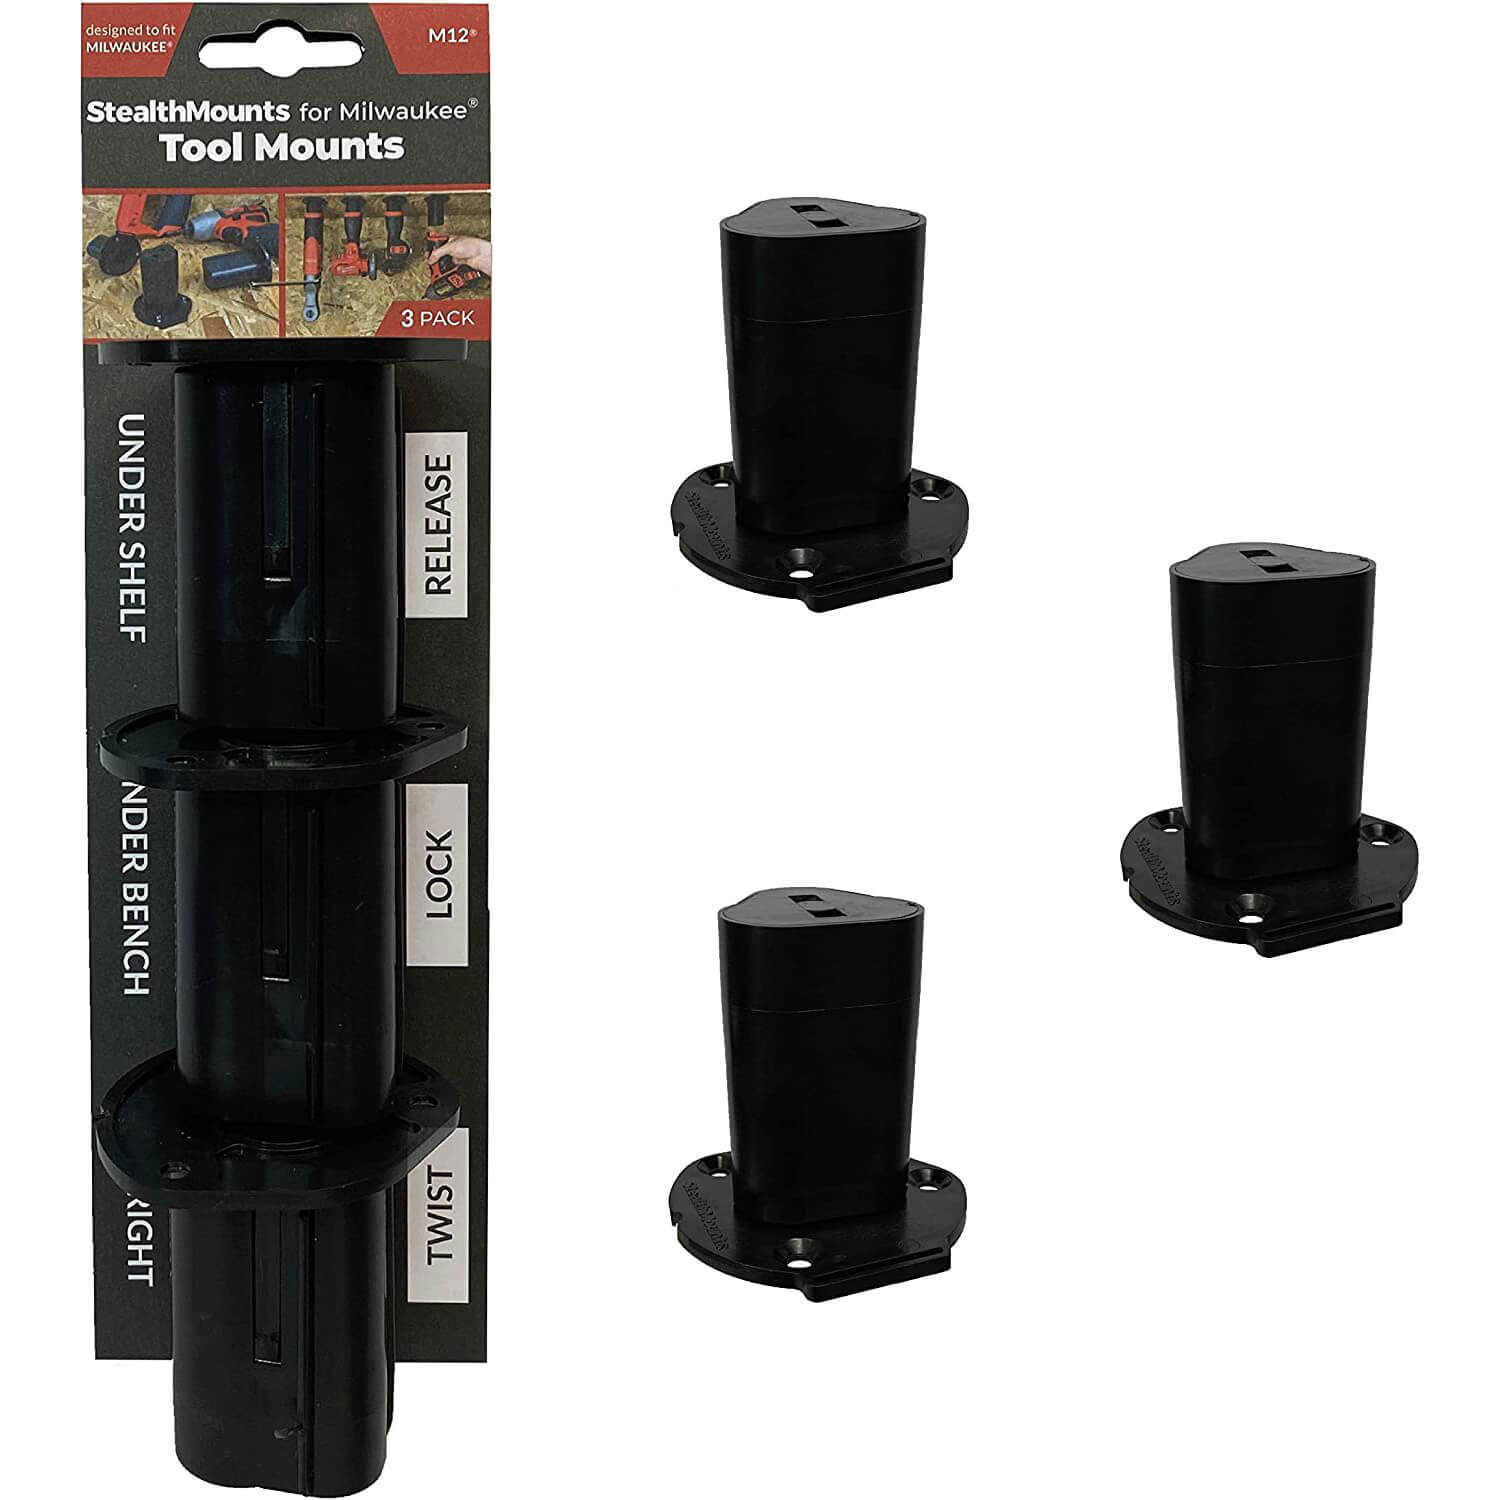 Image of Stealth Mounts 3 Pack Tool Mounts For Milwaukee 12v M12 Tools Black